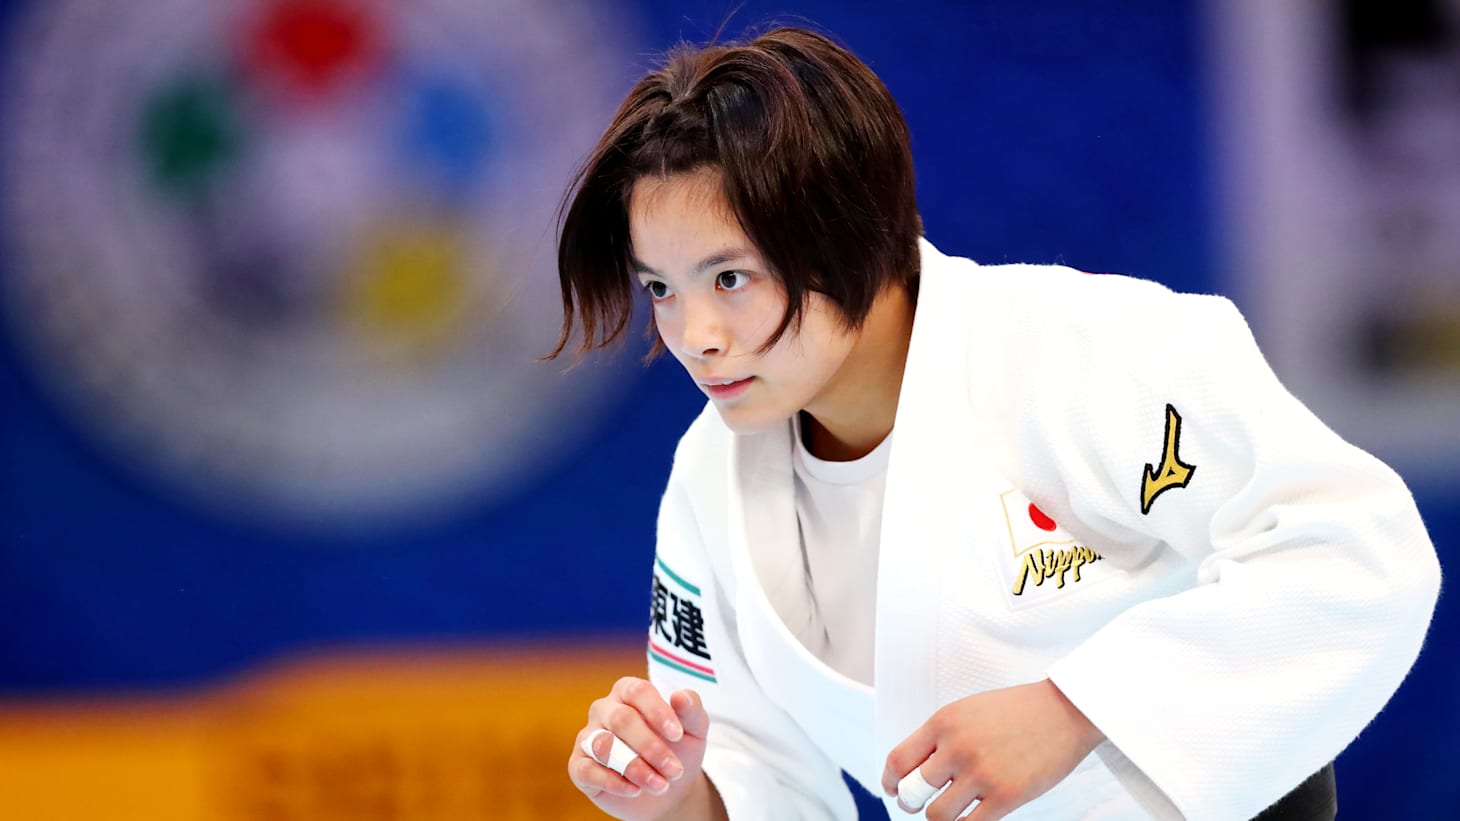 Medal bonanza for Japan on Day 2 of the 2019 Judo World Championships